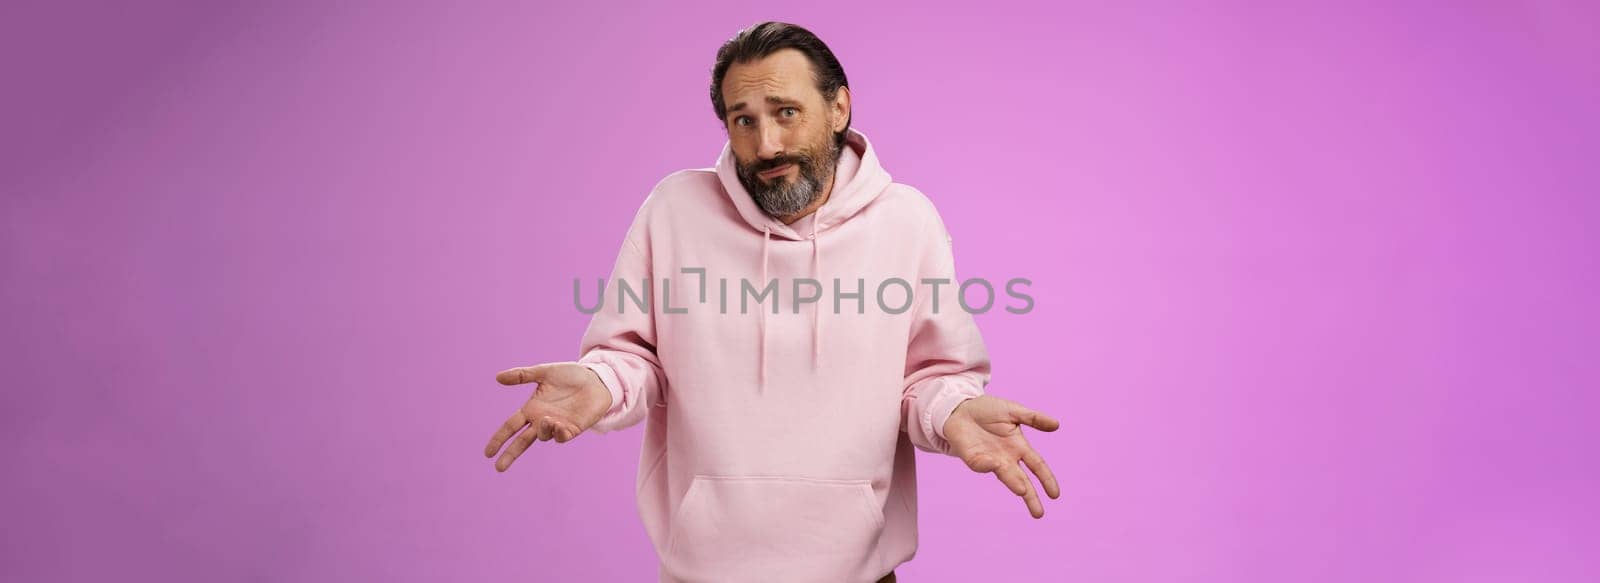 Portrait clueless unaware father cringing smirking uncertain shrugging hands spread sideways no idea, look questioned doubtful cannot answer unknown topic, standing purple background.